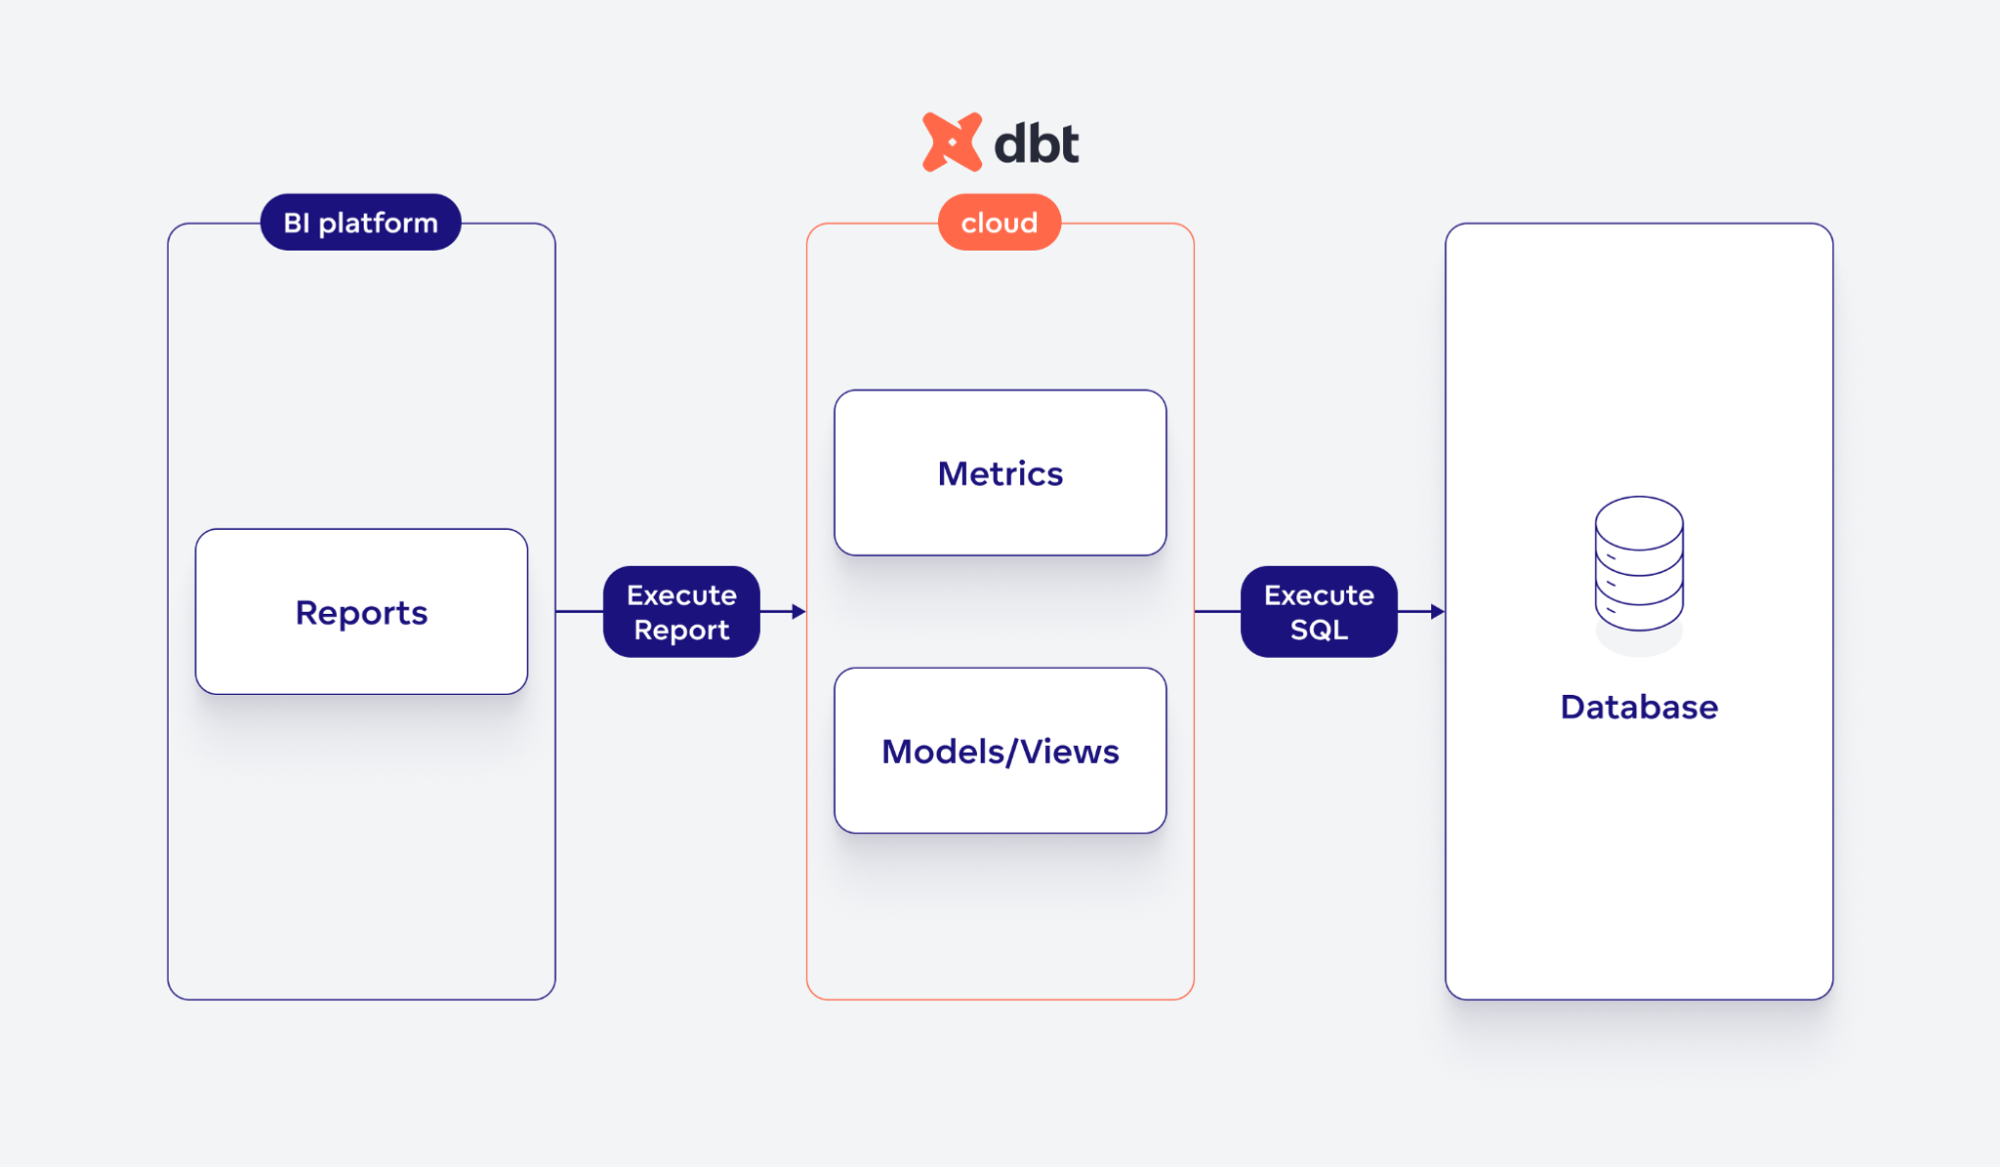 BI platform does not contain any semantic layer and does not generate SQL from metrics. It fully integrates with dbt Cloud APIs, which can generate SQL from metrics (in context), execute SQL, and cache results.